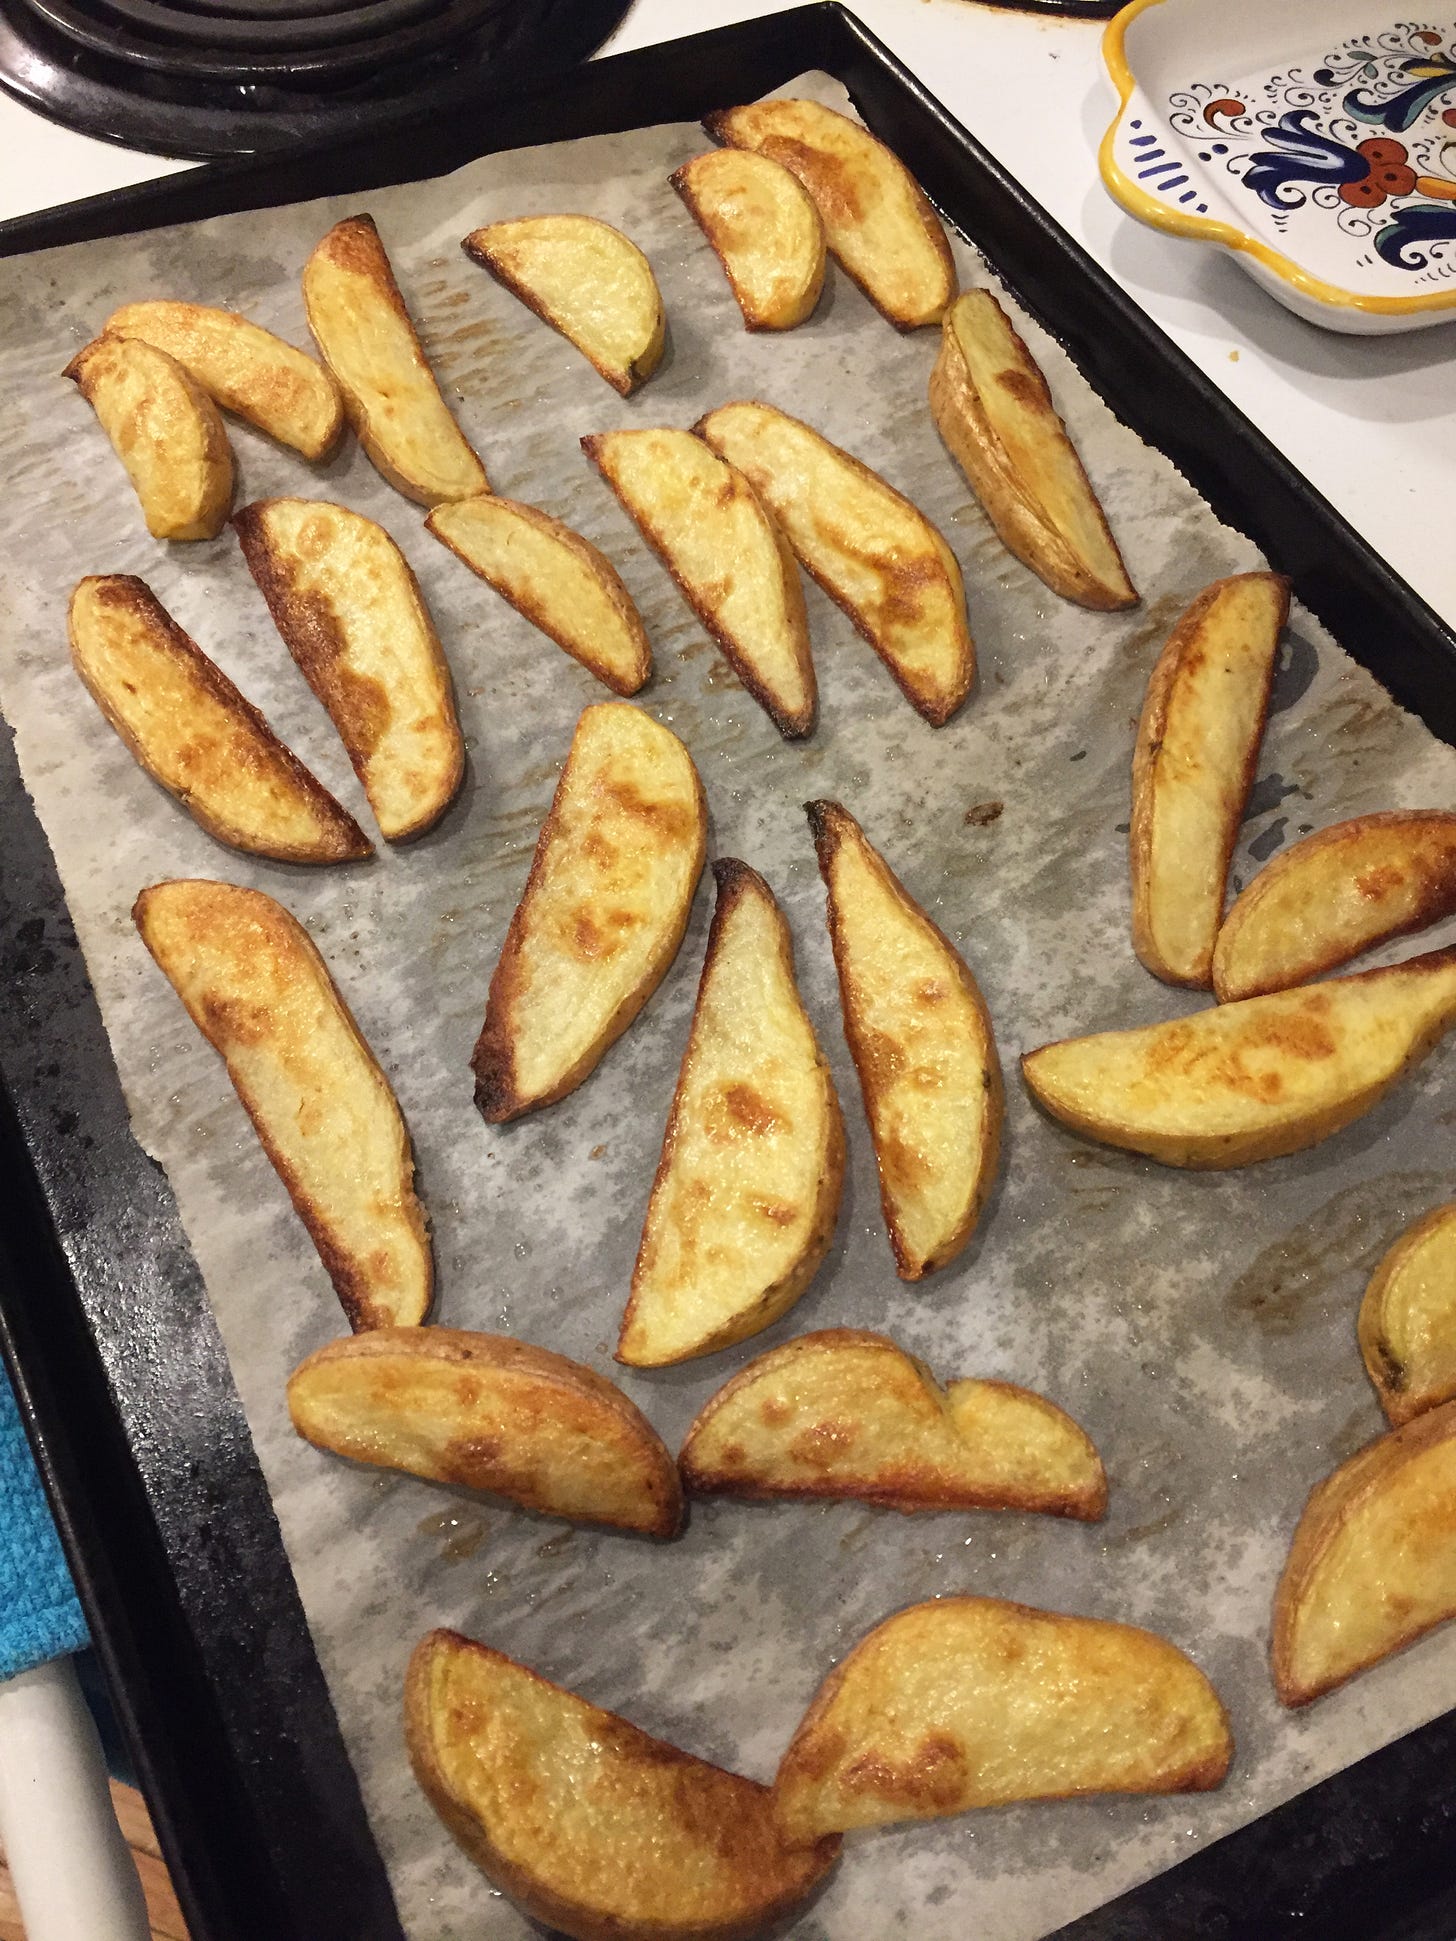 A baking sheet lined with parchment and sitting on top of the stove, full of perfectly browned wedge fries.